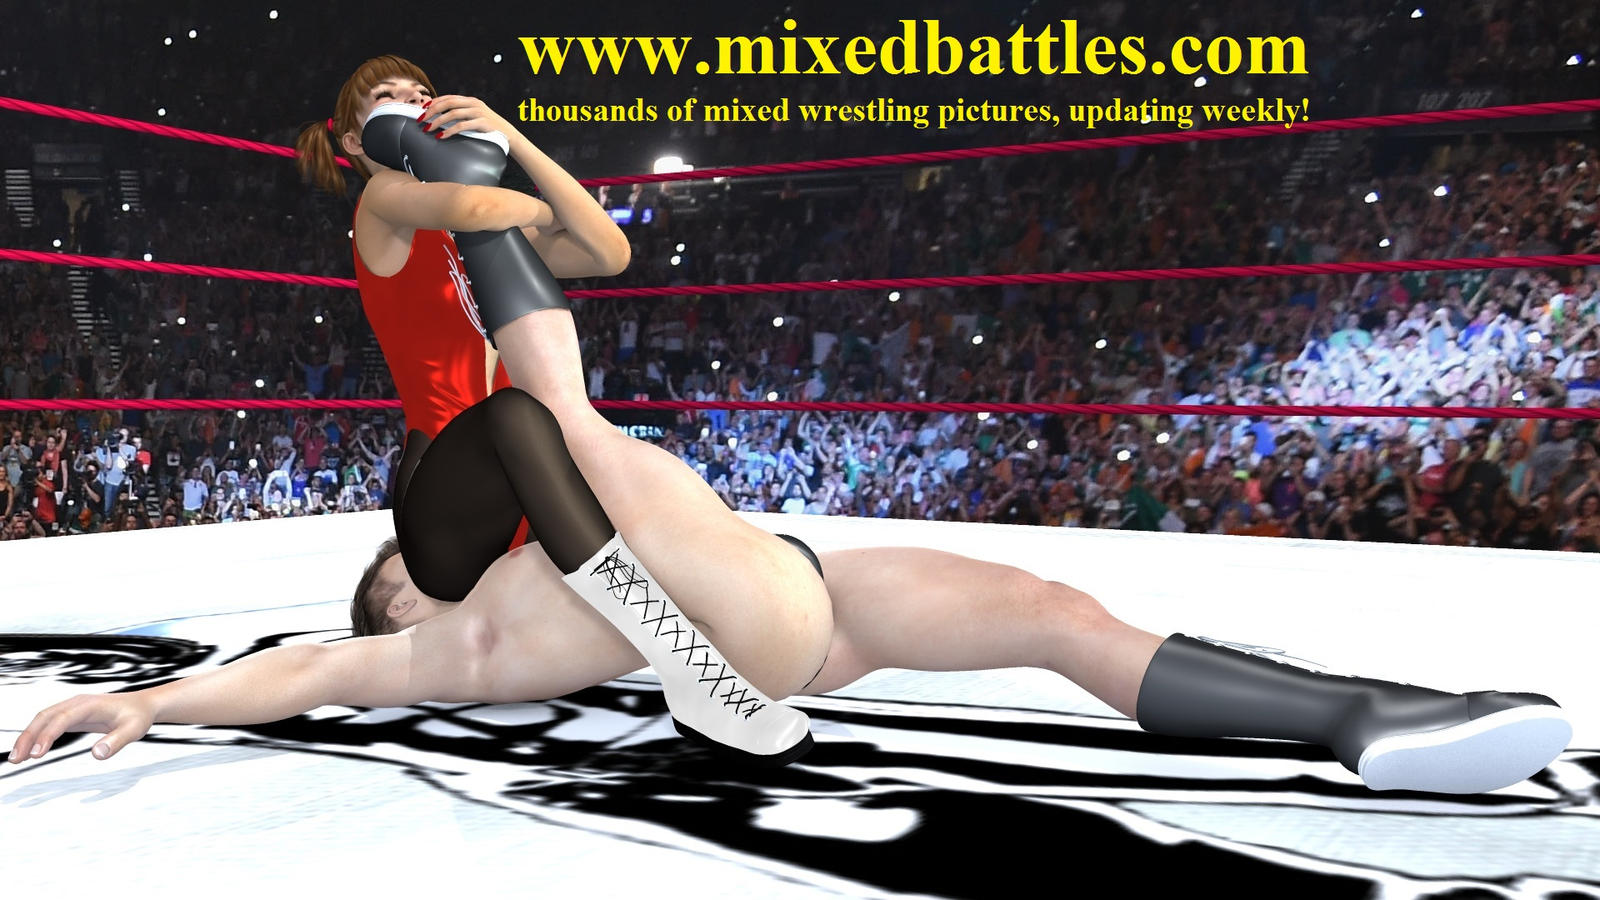 mixed_wrestling___leglock_by_q1911_df1ifgd-fullview.jpg